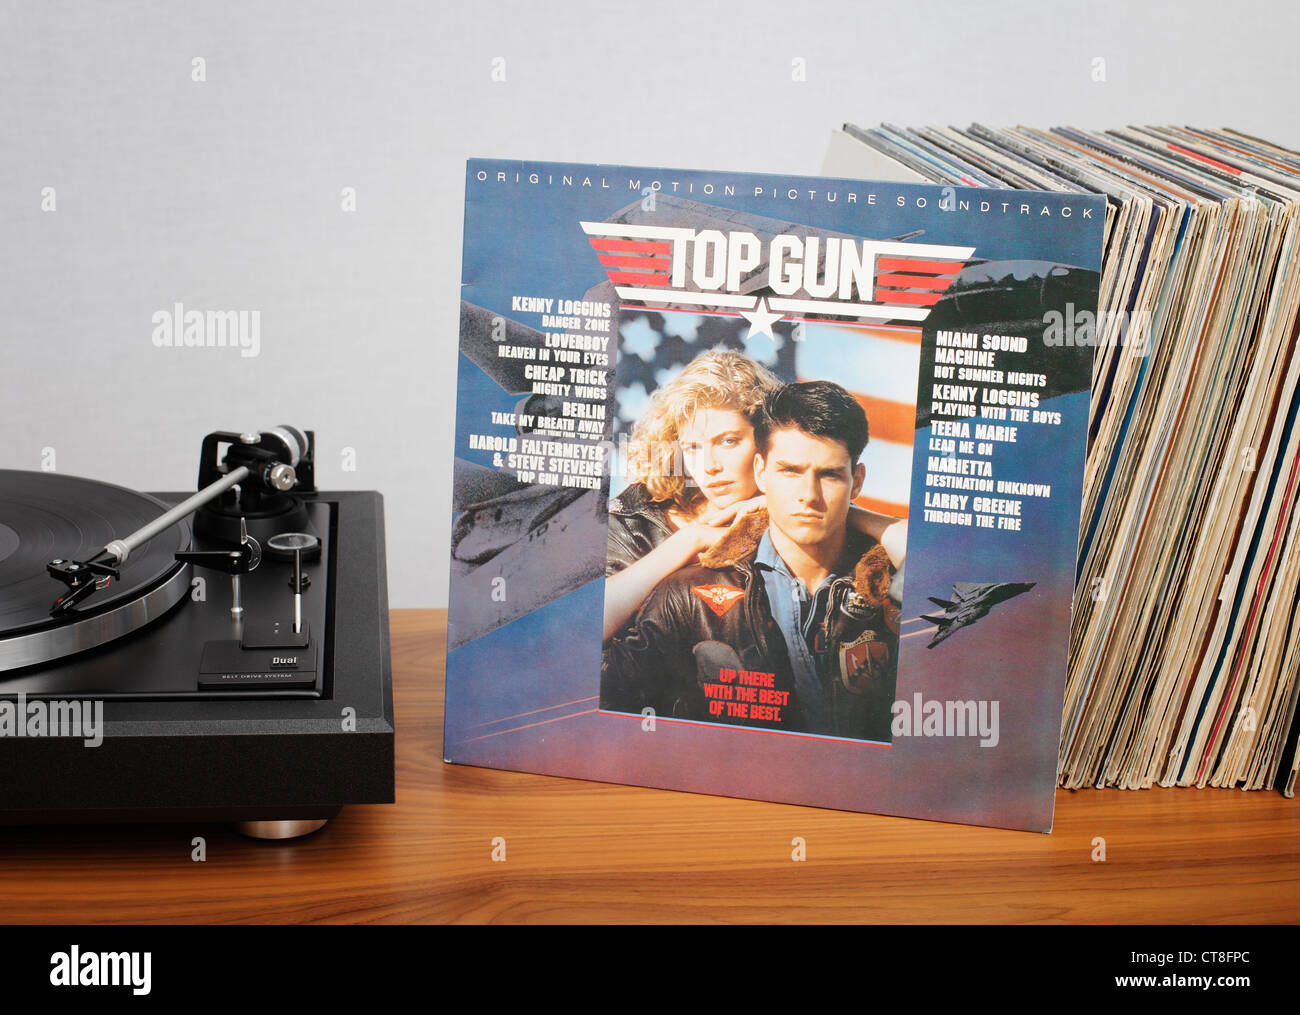 Top Gun is the soundtrack from the film of the same name, released in 1986 by Columbia Records. Stock Photo